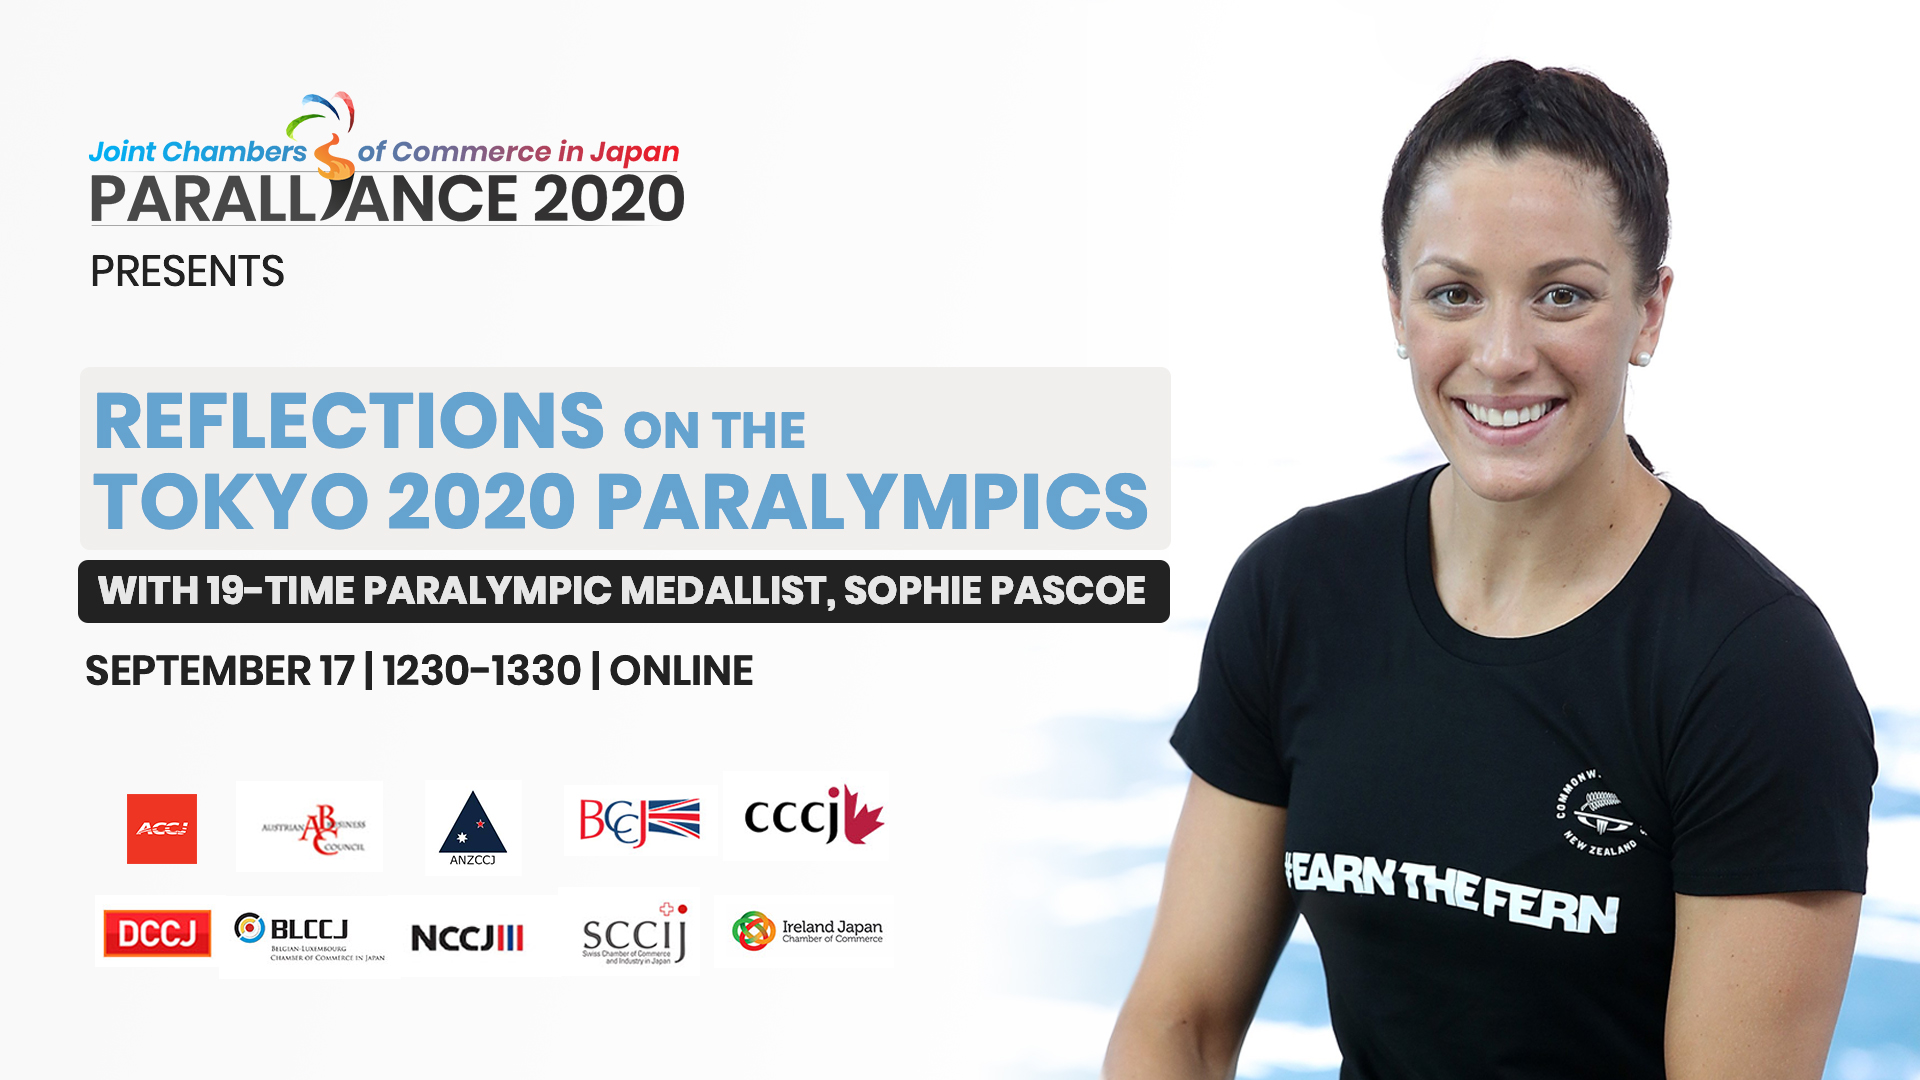 Paralliance: Reflections on the Tokyo 2020 Paralympics with Sophie Pascoe